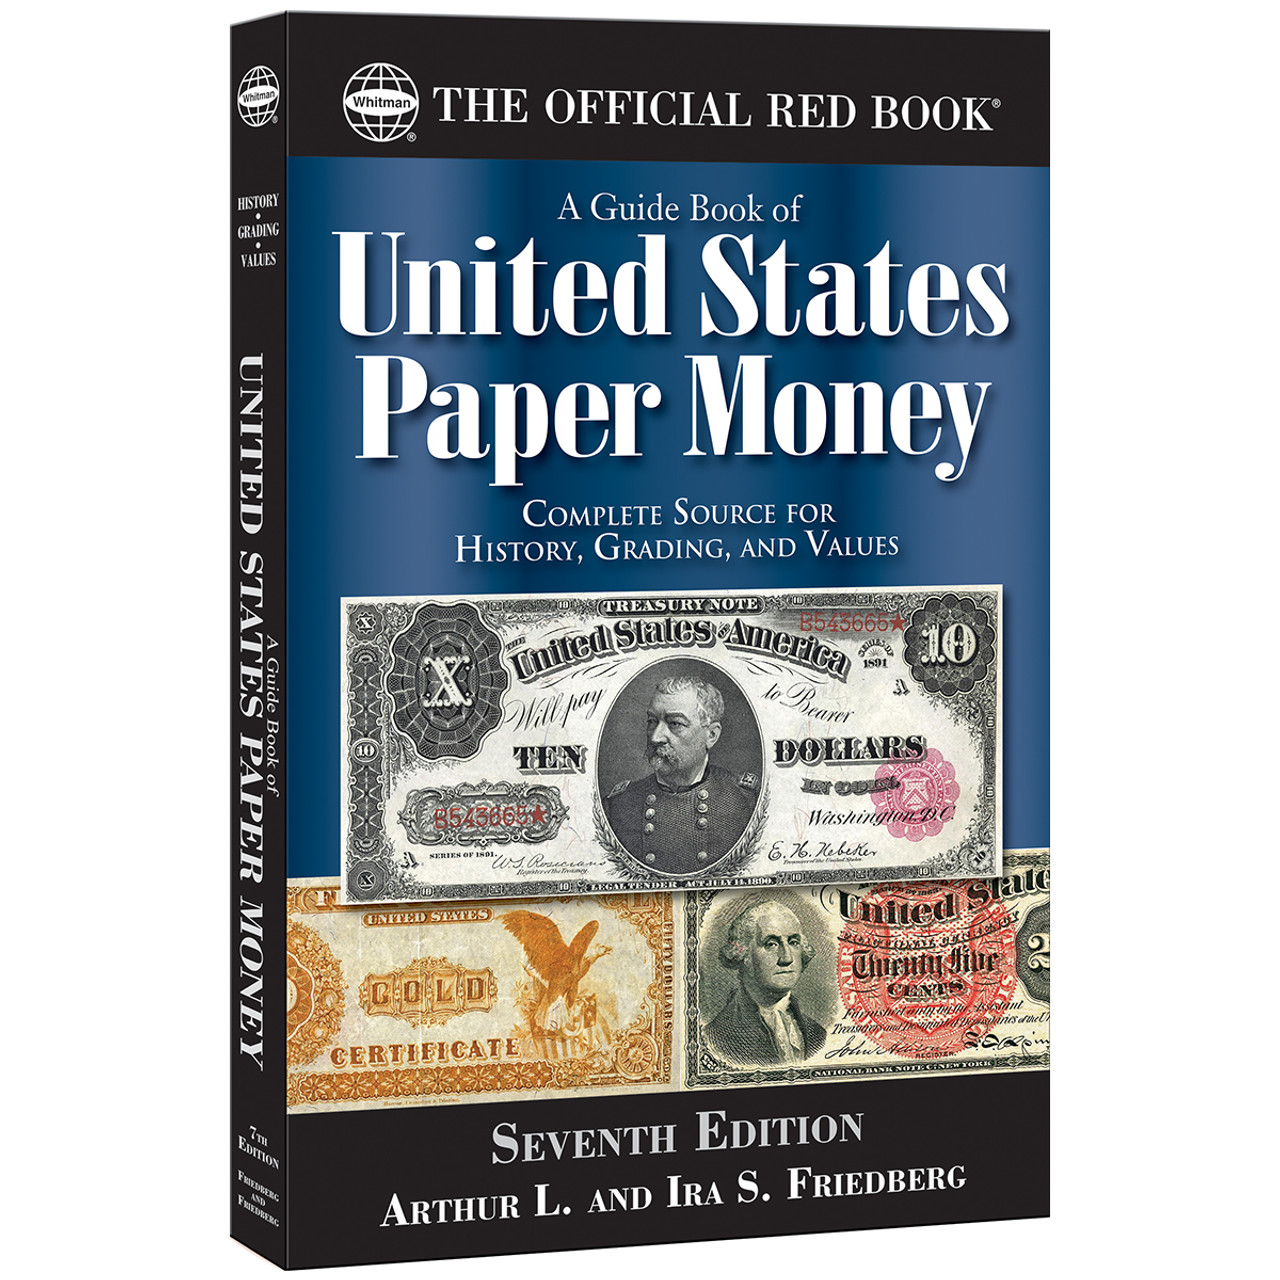 Catalog of US Paper Money 7th Edition Clearance Priced only $9.95 